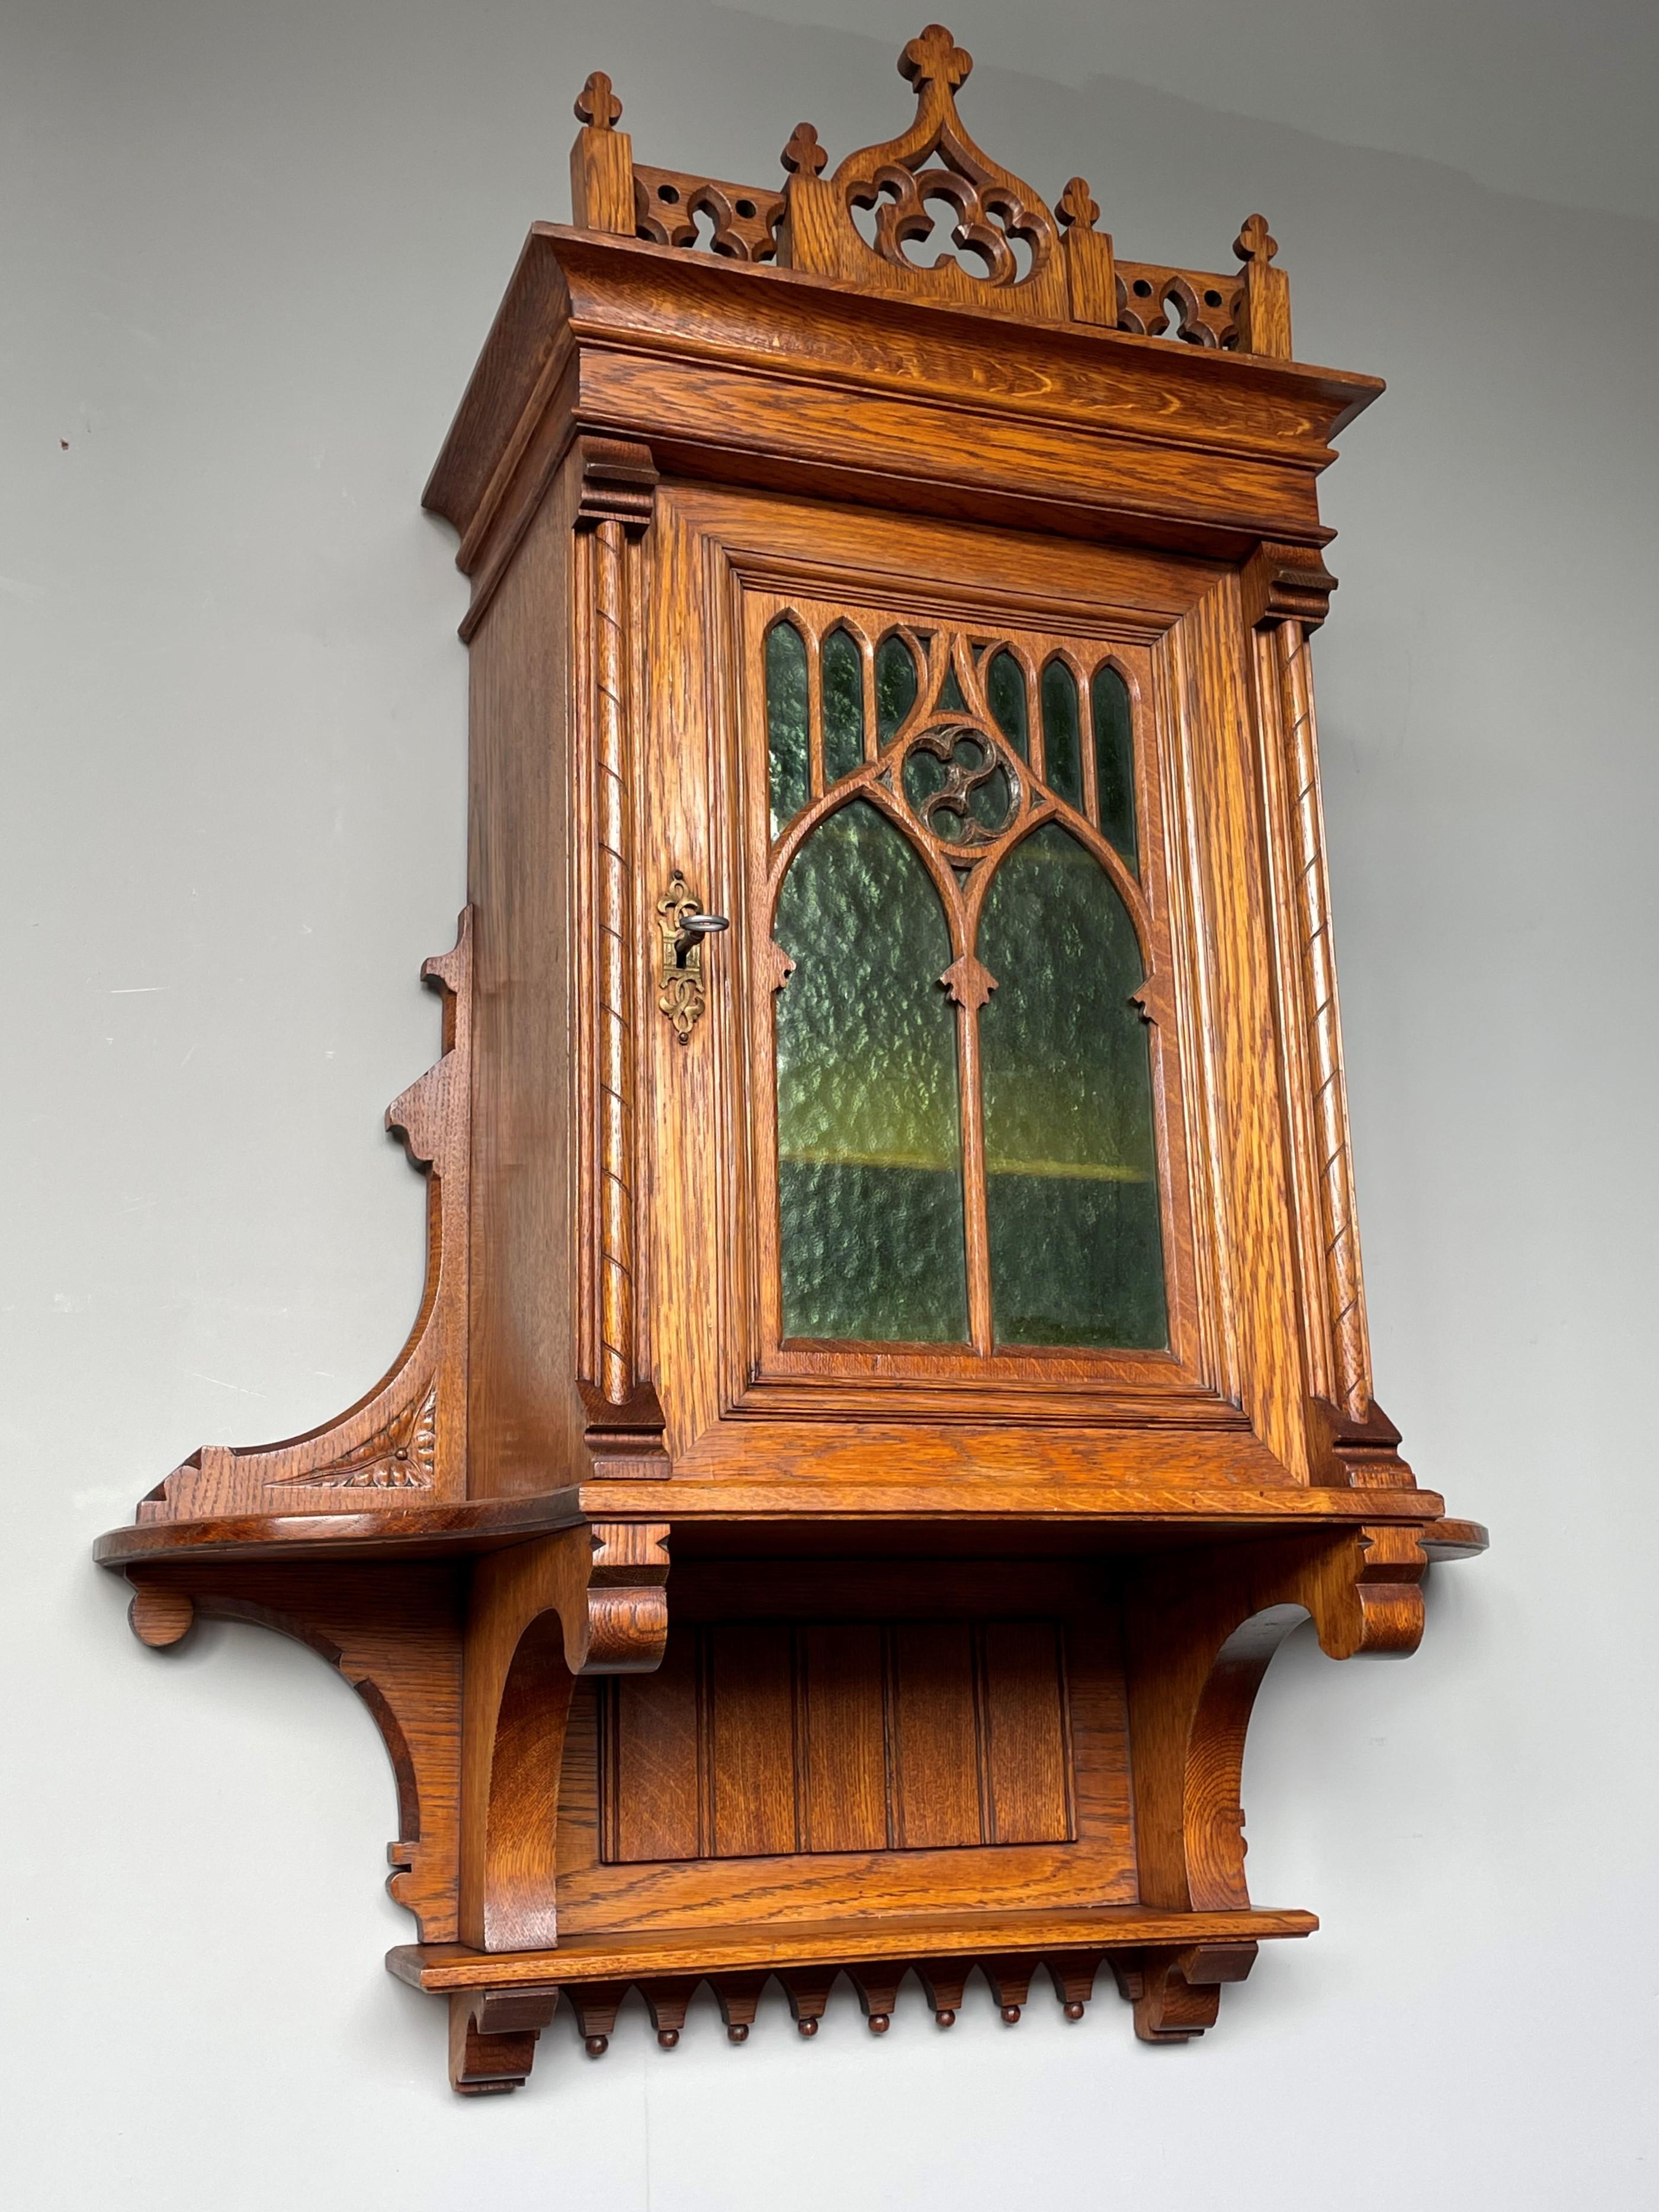 Unique and striking Gothic Revival wall cabinet with perfect working lock and key.

This handcrafted and probably unique Gothic Revival wall cabinet from the late 1800s is another one of our magnificent recent finds. The size, the quality in the